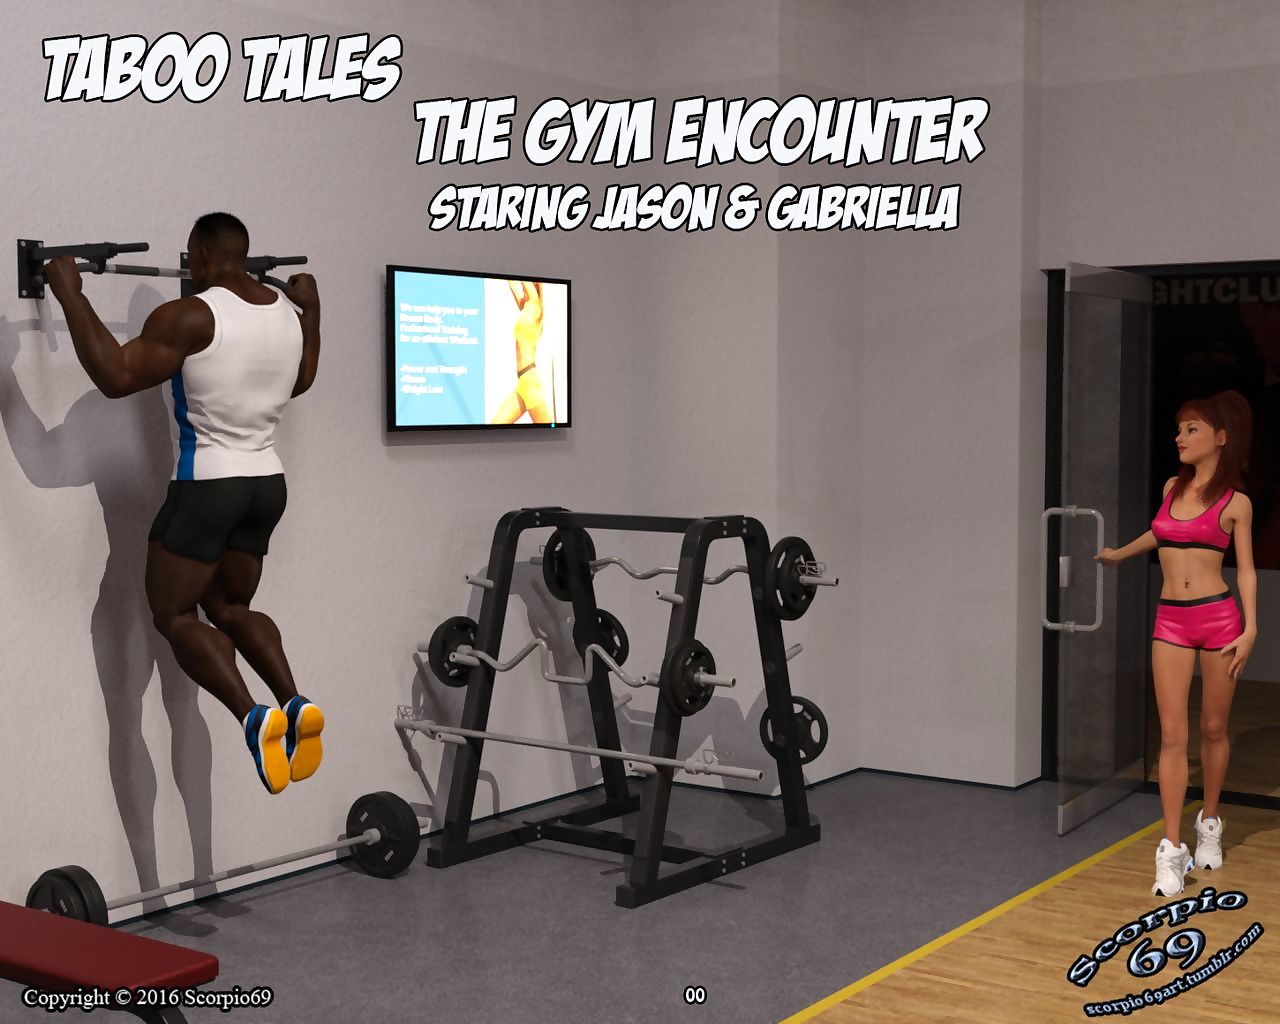 Be transferred to Gym Encounter- Prohibit Tales